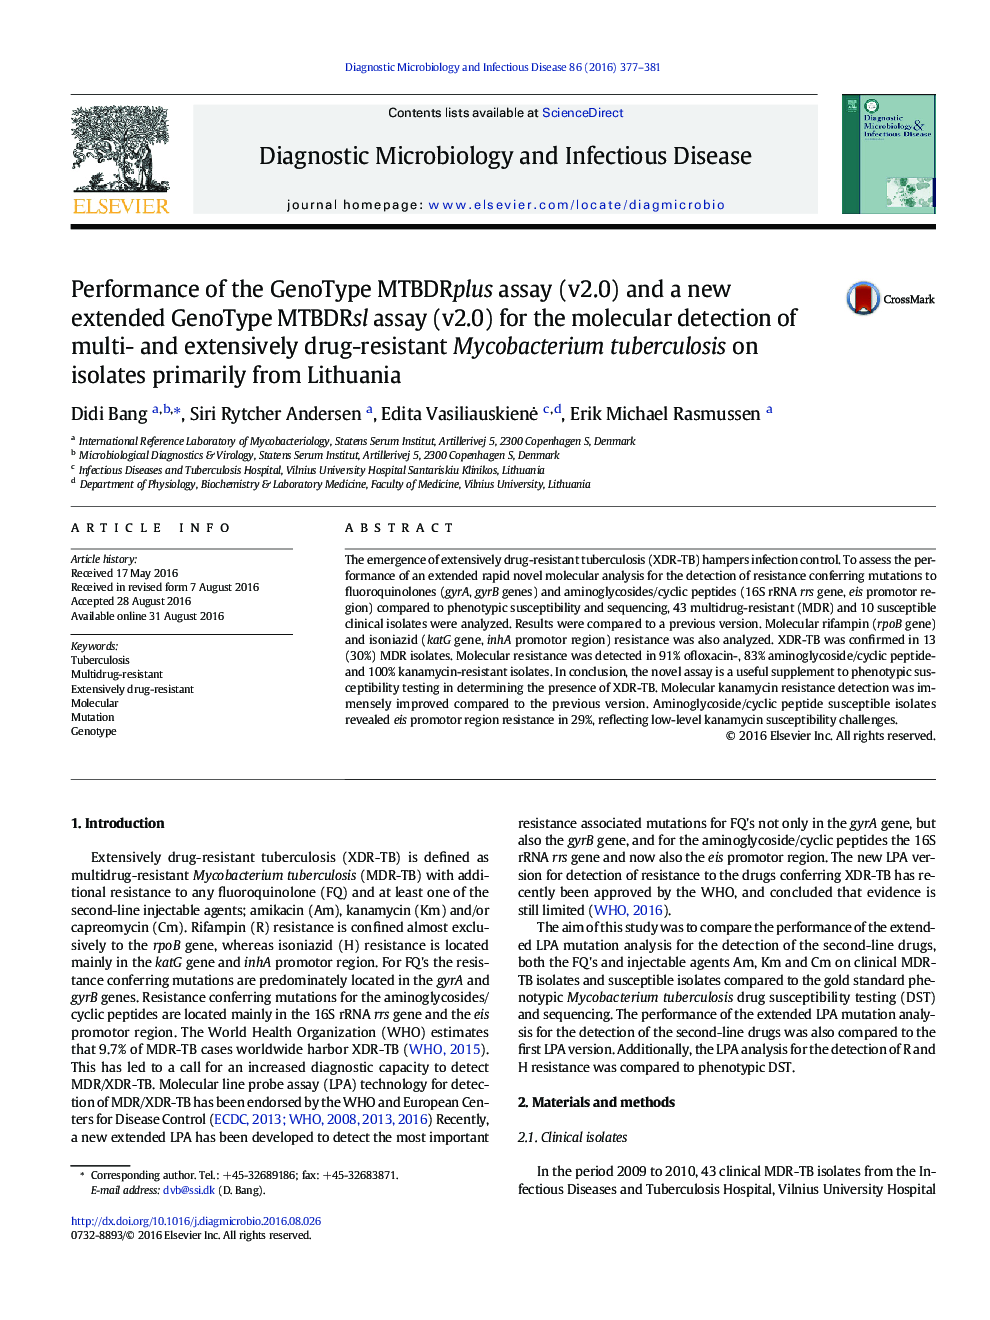 Performance of the GenoType MTBDRplus assay (v2.0) and a new extended GenoType MTBDRsl assay (v2.0) for the molecular detection of multi- and extensively drug-resistant Mycobacterium tuberculosis on isolates primarily from Lithuania